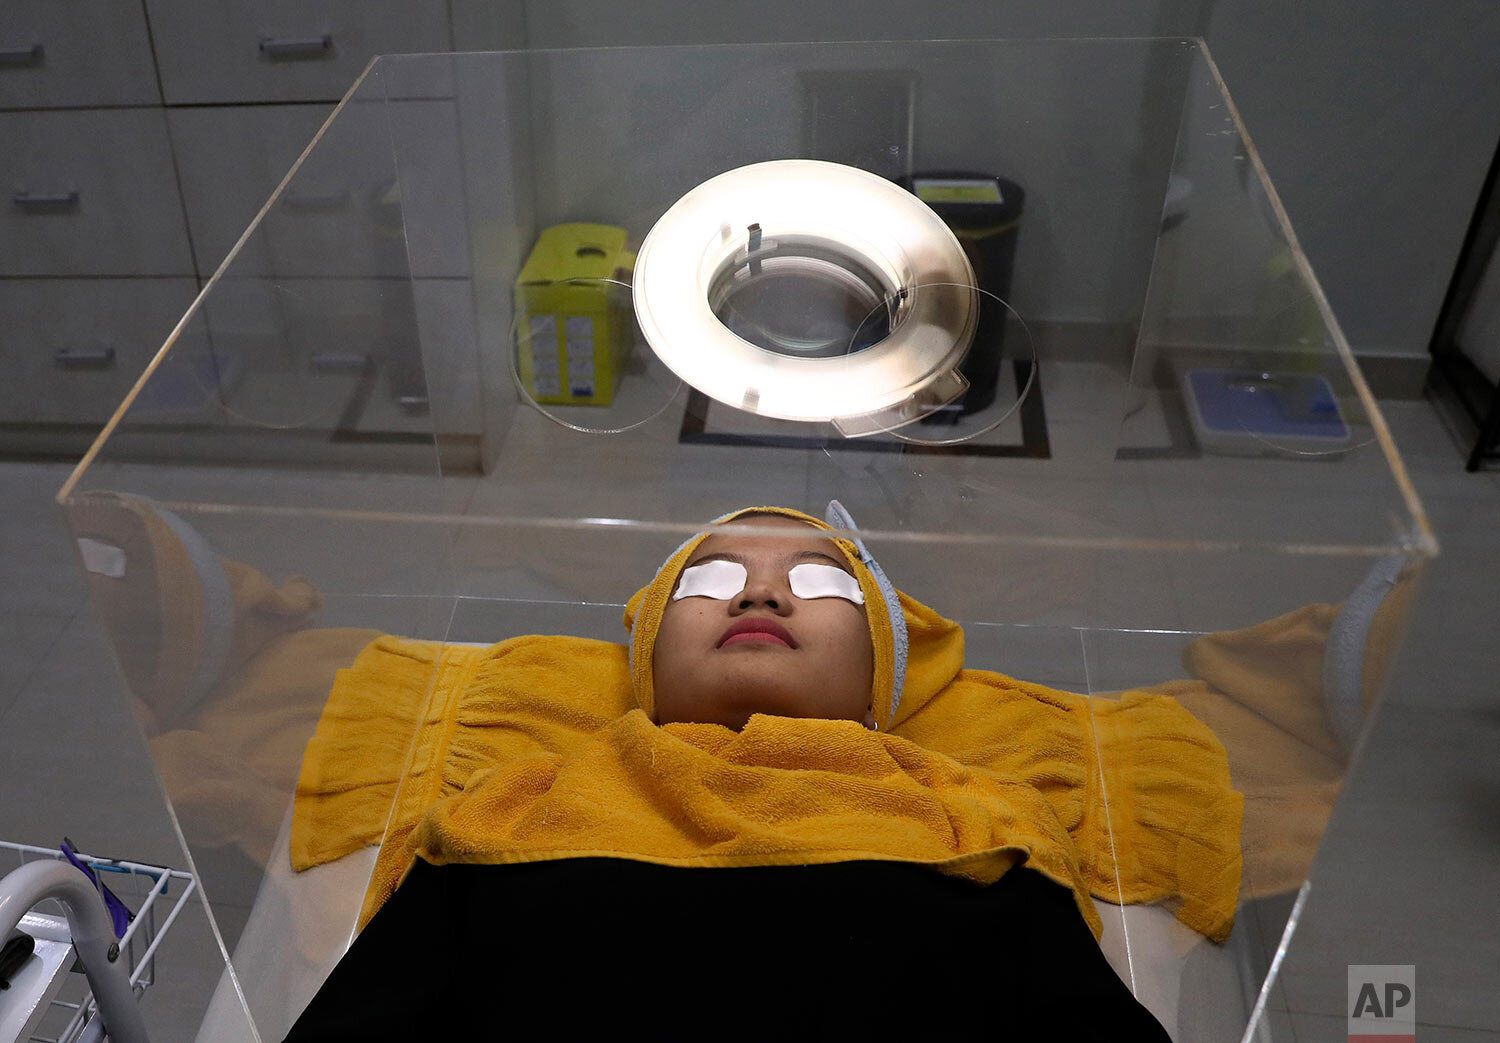  A patient waits for treatment inside a protective acrylic box used as a precaution against the new coronavirus outbreak at the beauty clinic at Tambak Hospital in Jakarta, Indonesia, Tuesday, June 23, 2020. (AP Photo/Tatan Syuflana) 